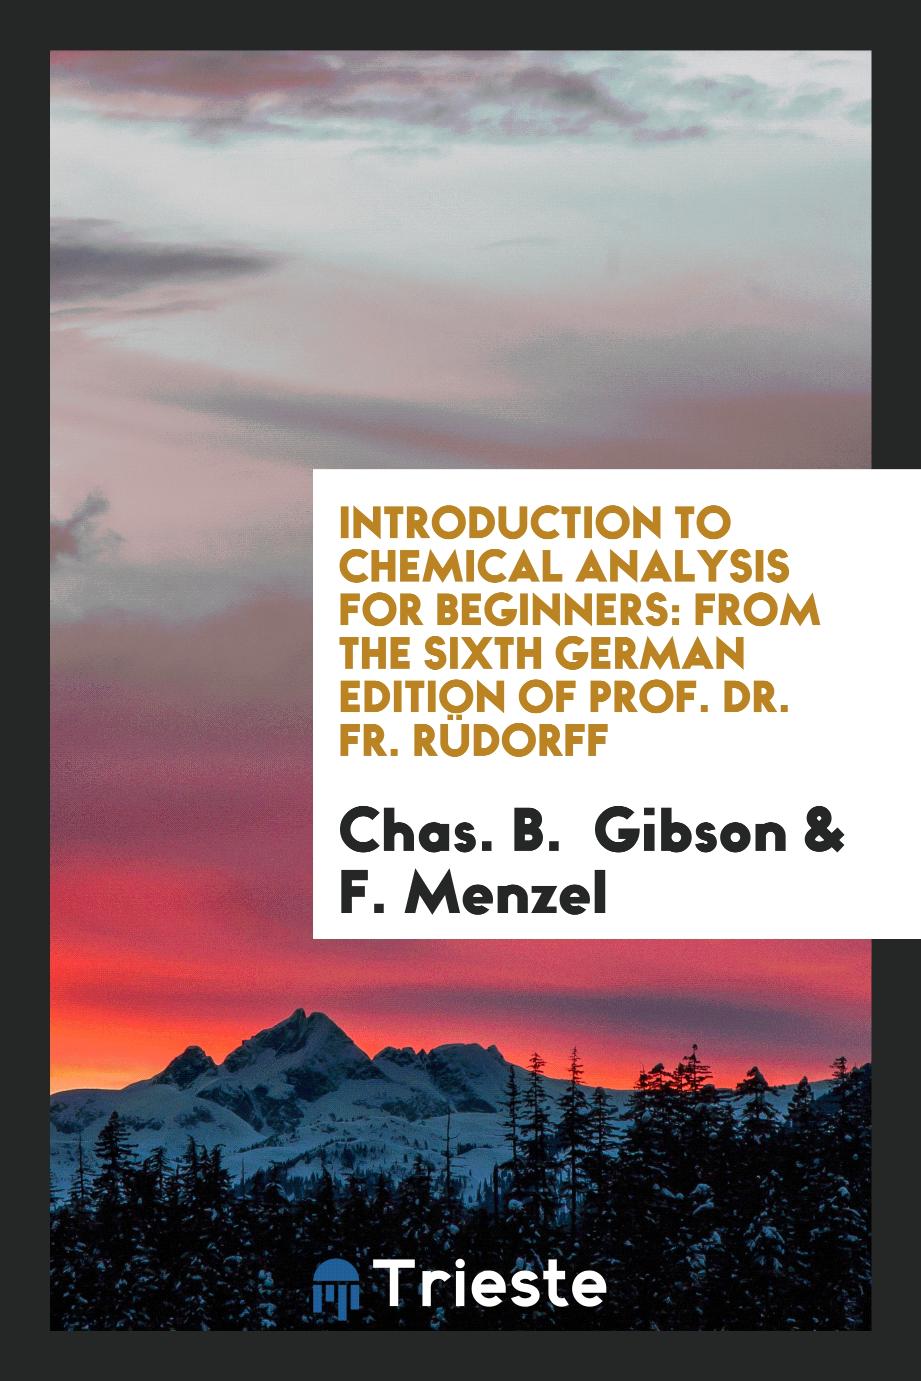 Introduction to Chemical Analysis for Beginners: From the Sixth German Edition of Prof. Dr. Fr. Rüdorff